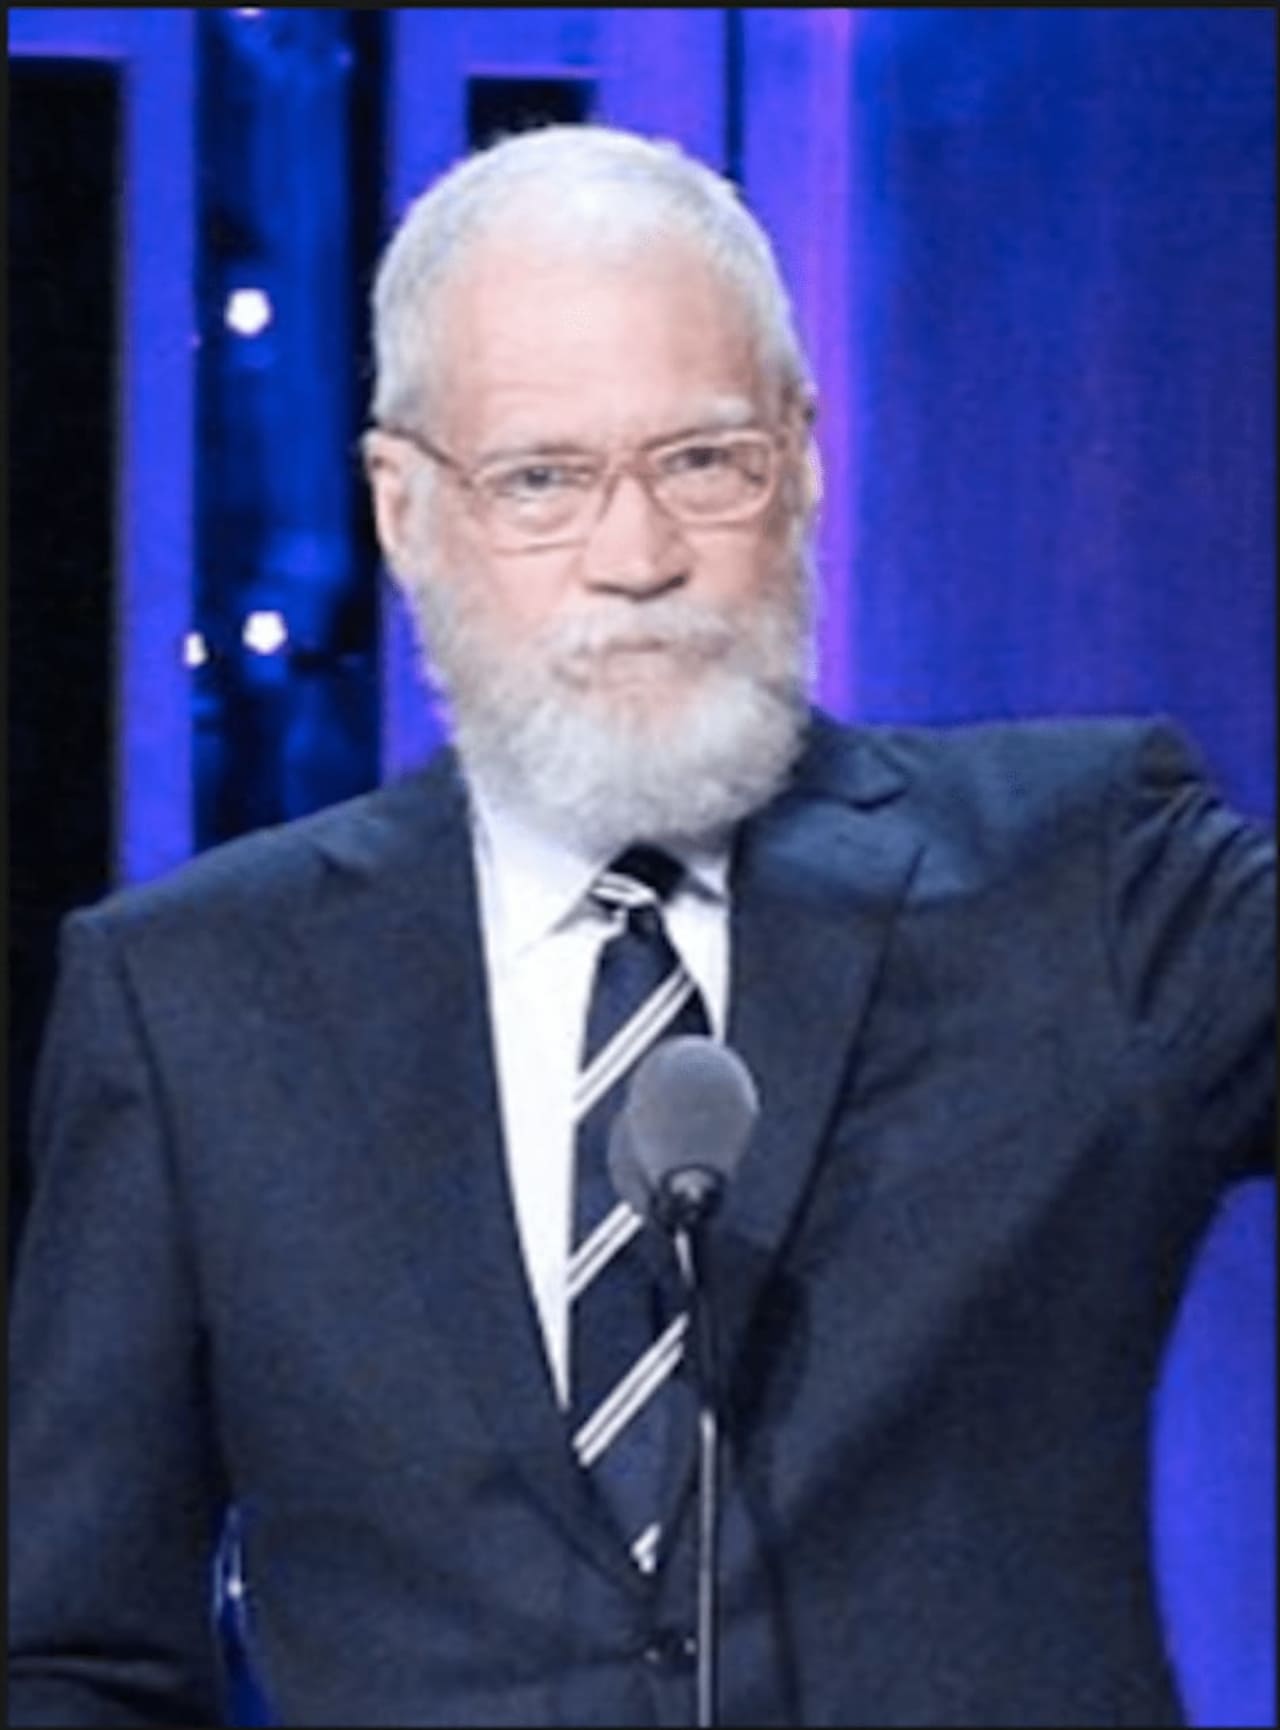 David Letterman is returning to TV with a new Netflix show.